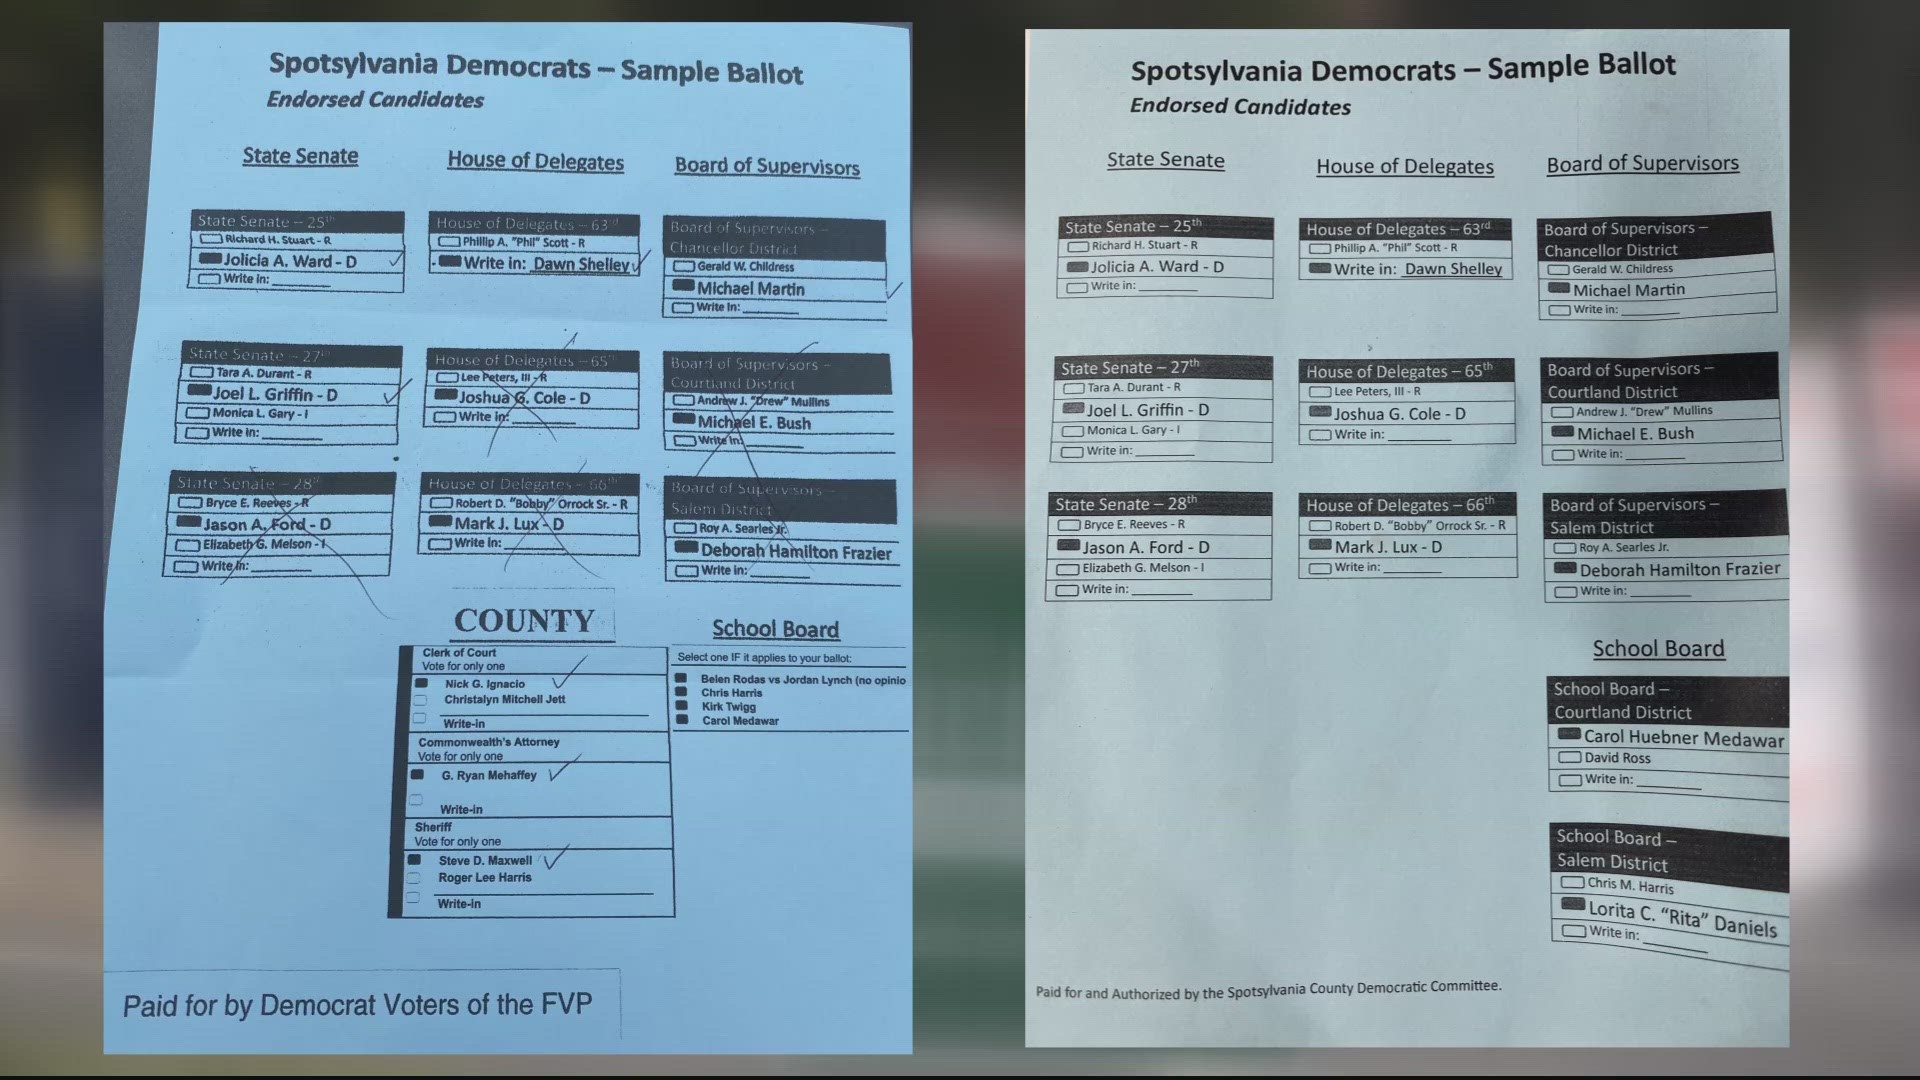 A Spotsylvania County man said false information on a sample ballot caused him to vote for people who didn't intend to.